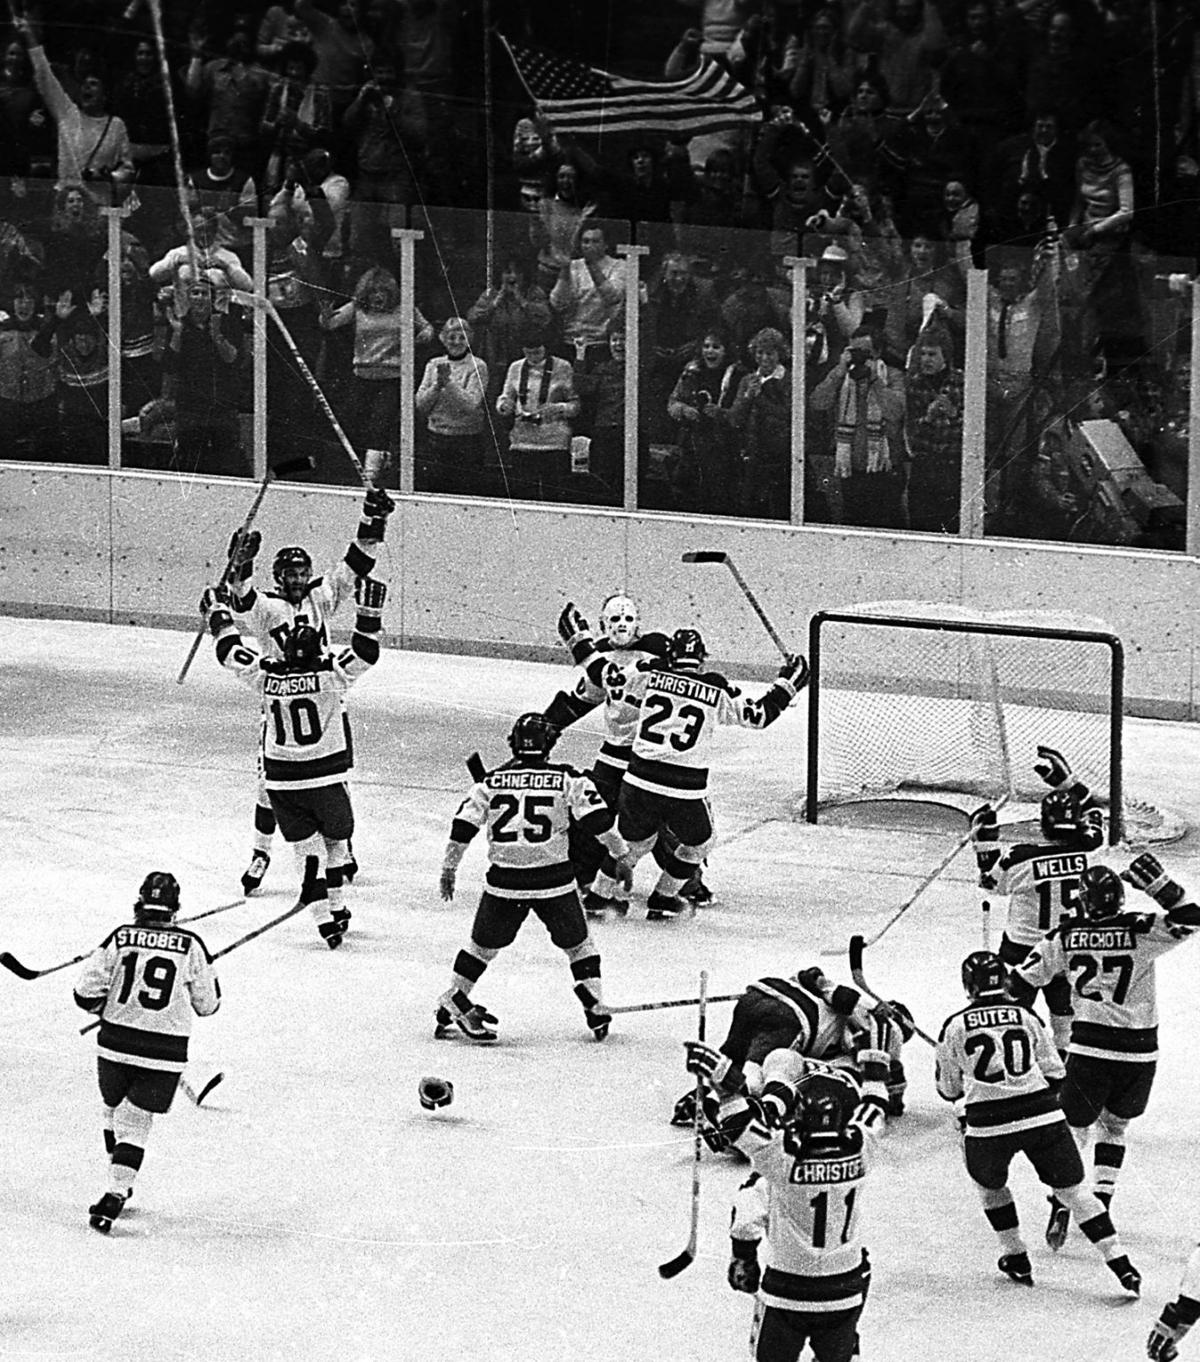 This Day in Hockey History – February 24, 1980 – U.S.A. Believes